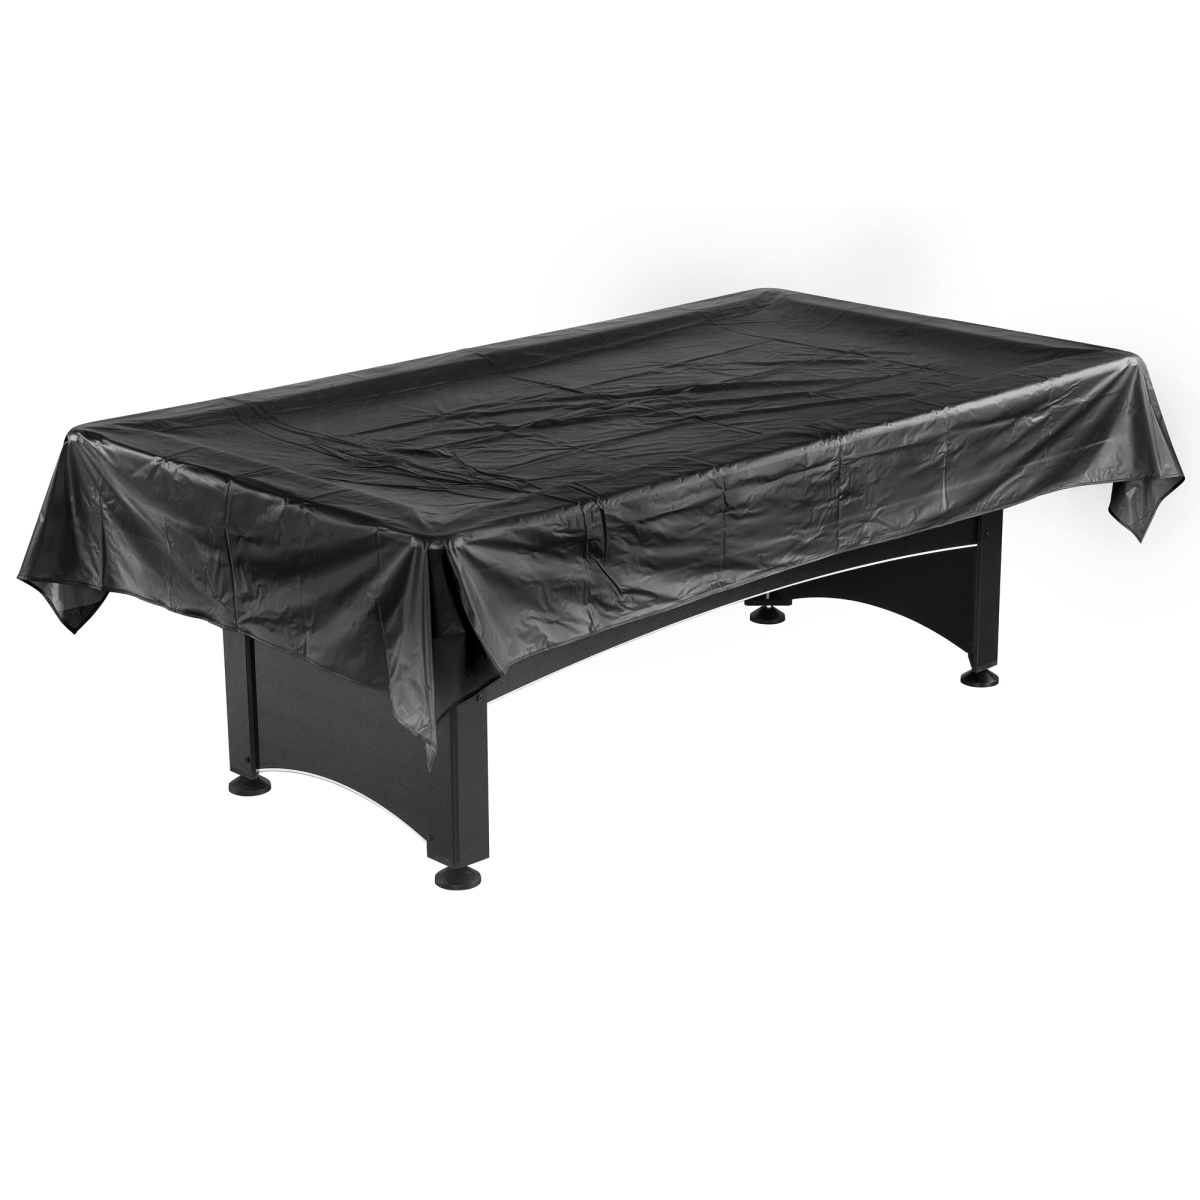 Ng2541 Pool Table Billiard Dust Cover For 7 To 8 Ft. Table, Black